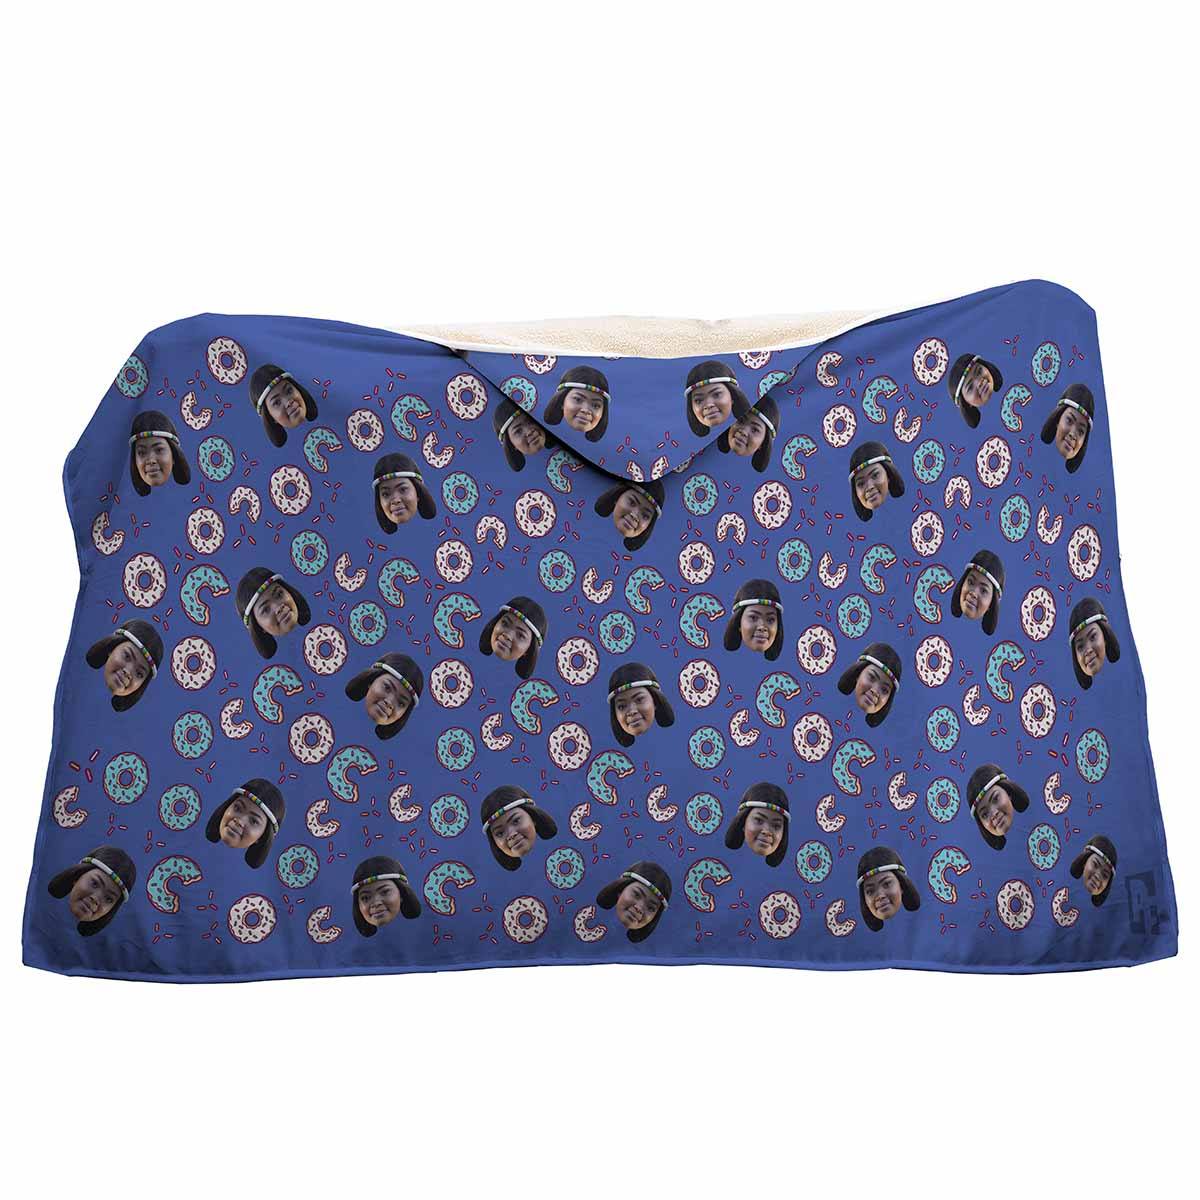 darkblue Donuts hooded blanket personalized with photo of face printed on it